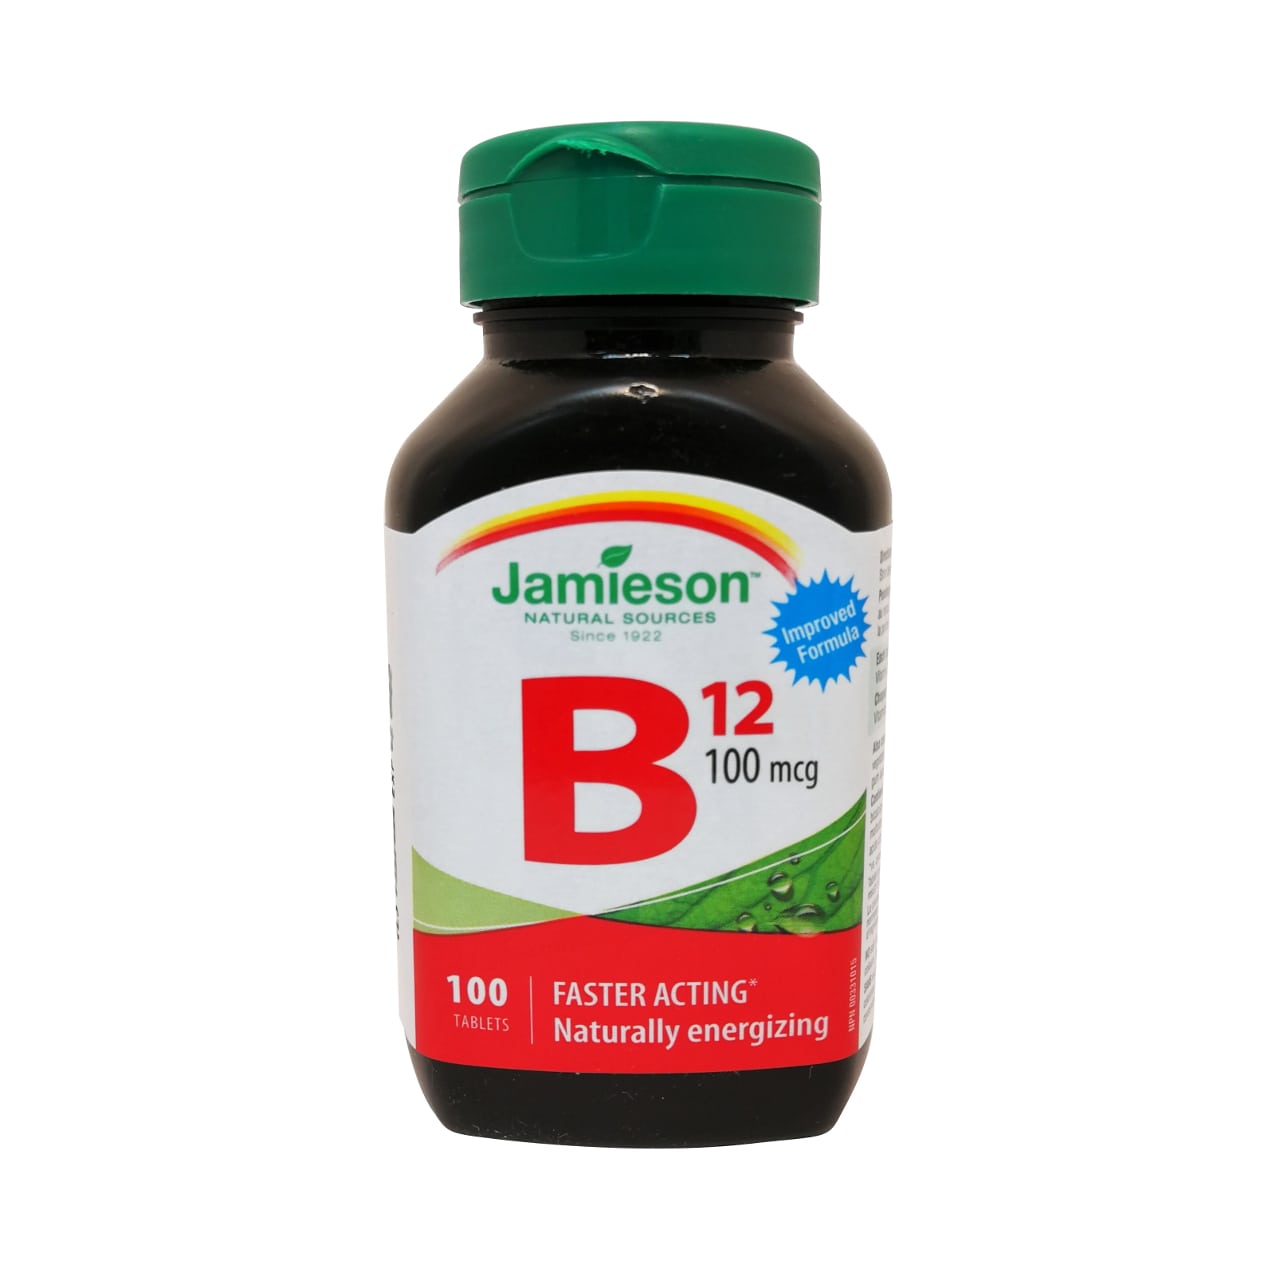 Product label for Jamieson B12 100mcg in English